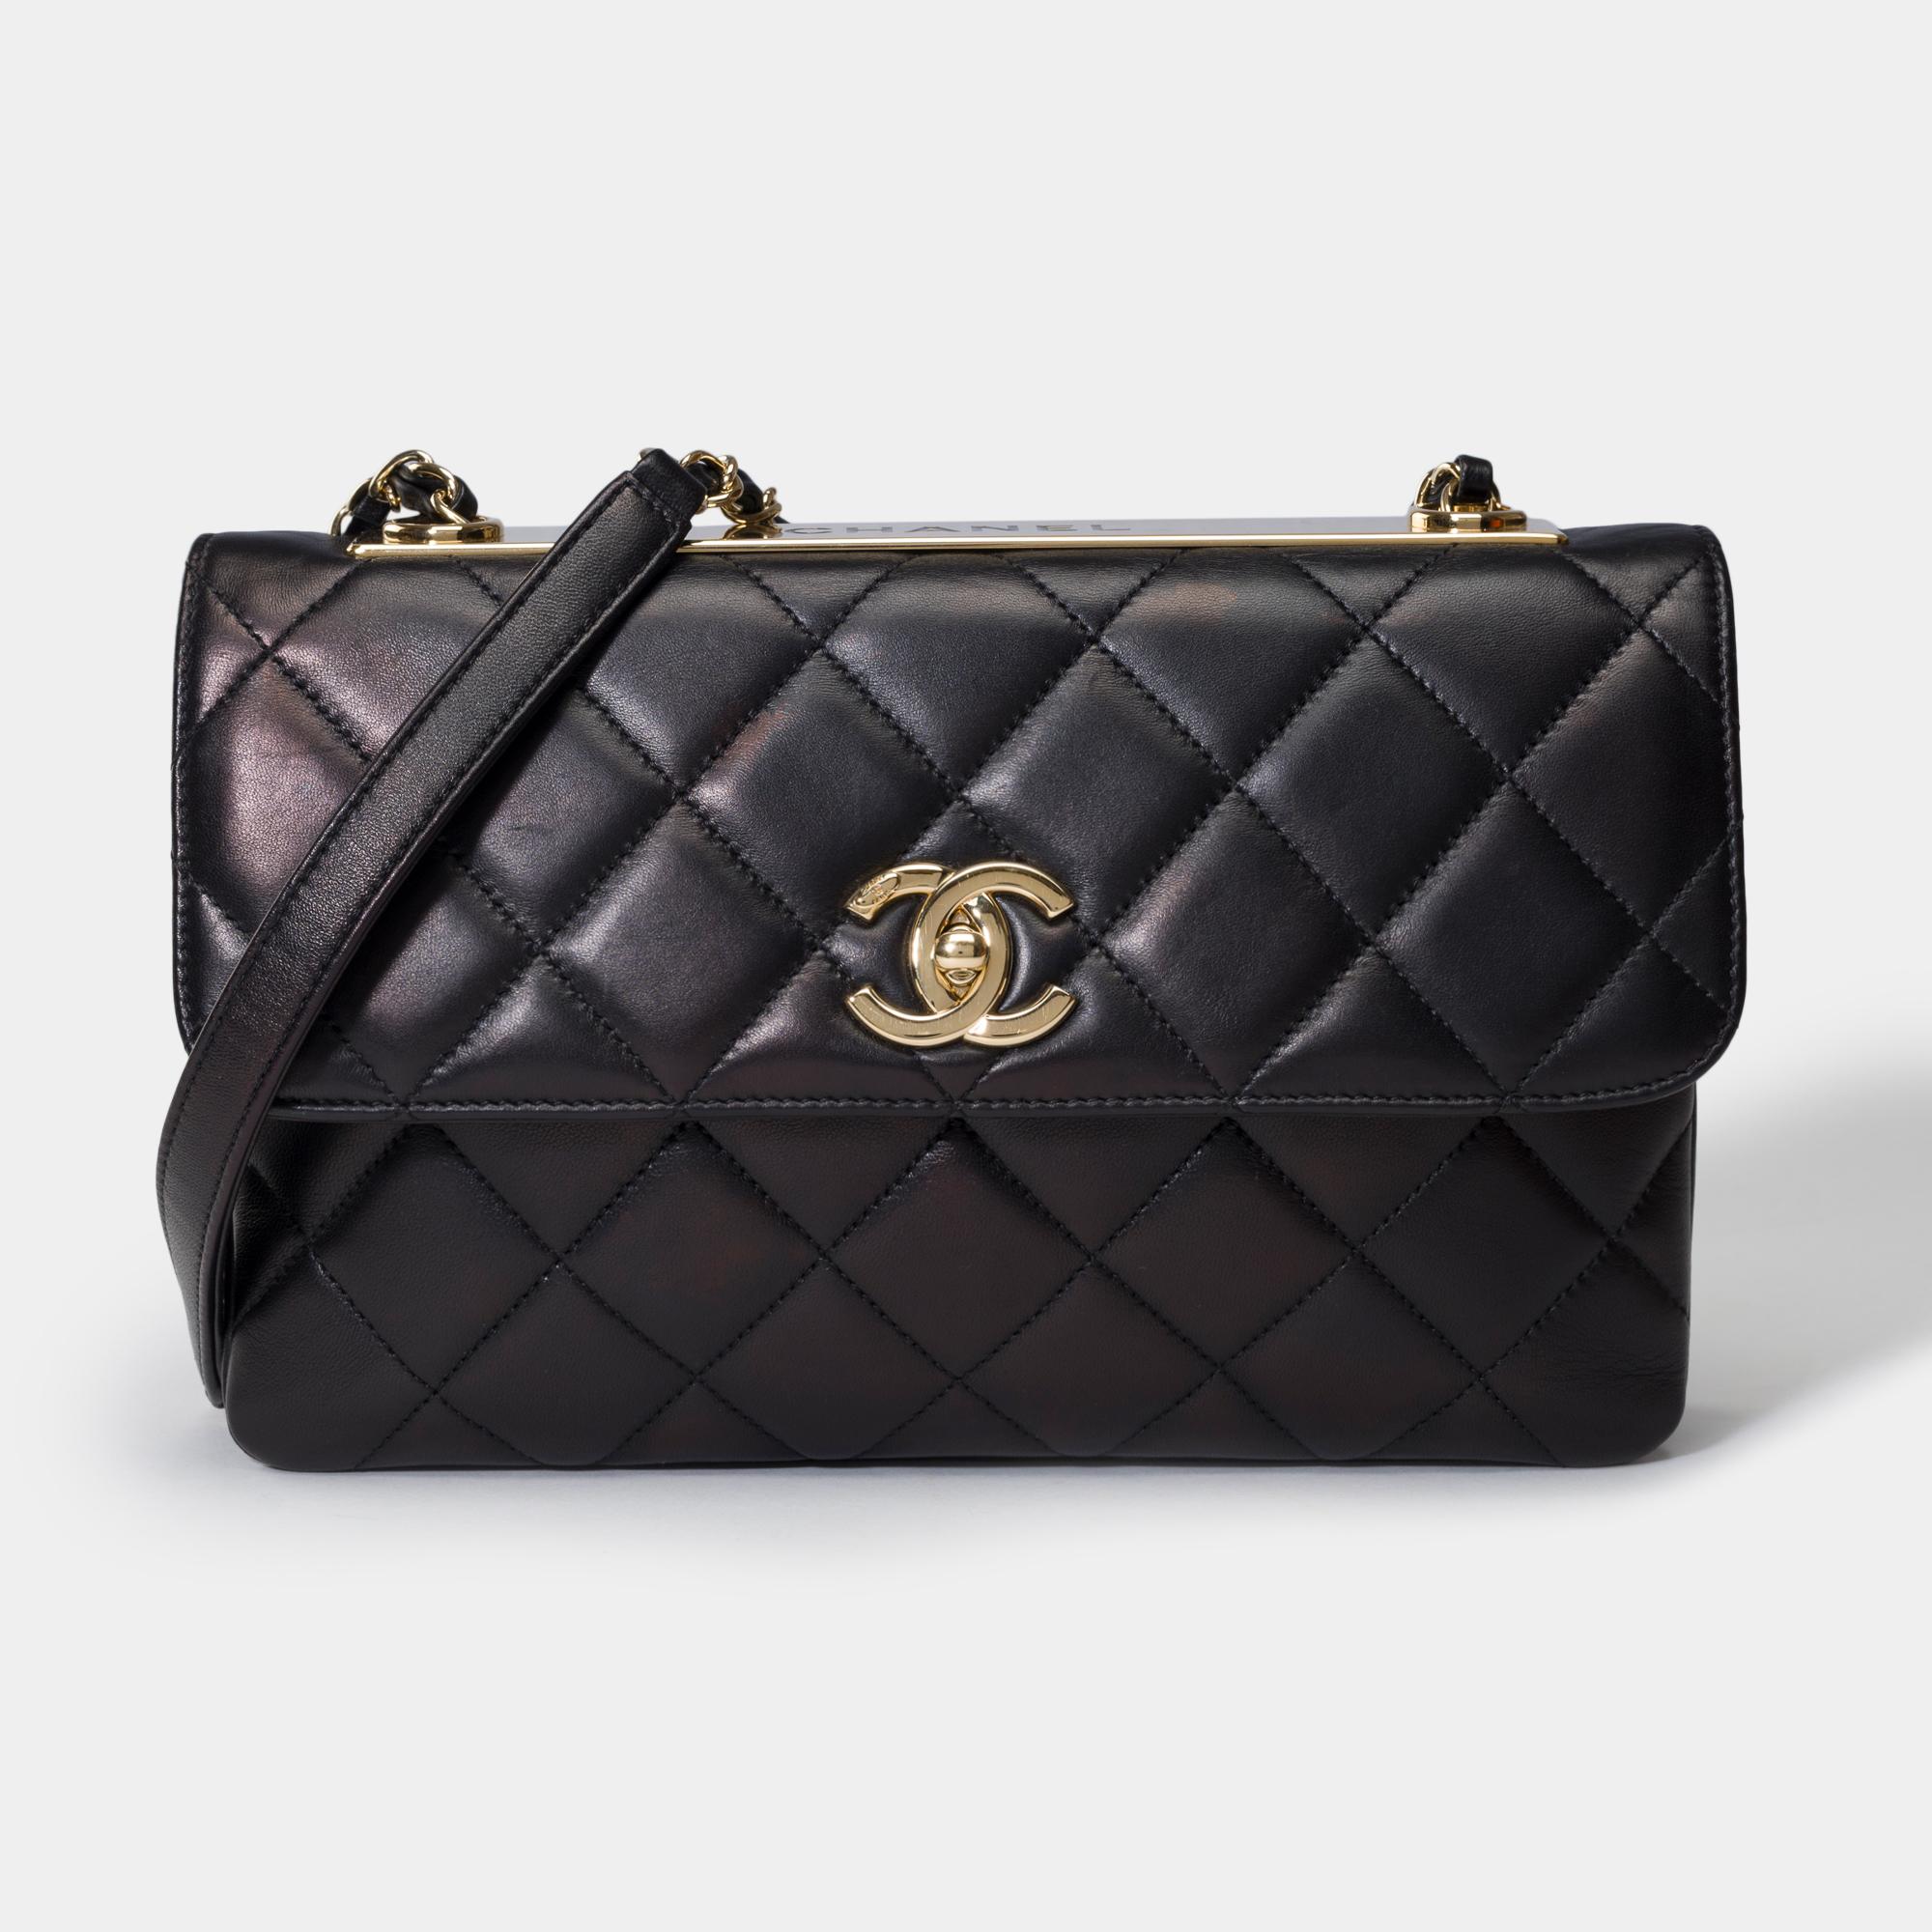 Superb​ ​Chanel​ ​Timeless/Classique​ ​Coco​ ​Trendy​ ​CC​ ​shoulder​ ​bag​ ​in​ ​black​ ​quilted​ ​leather,​ ​gold​ ​metal​ ​trim,​ ​a​ ​gold​ ​metal​ ​chain​ ​handle​ ​interlaced​ ​with​ ​black​ ​leather​ ​for​ ​a​ ​hand​ ​or​ ​shoulder

A​